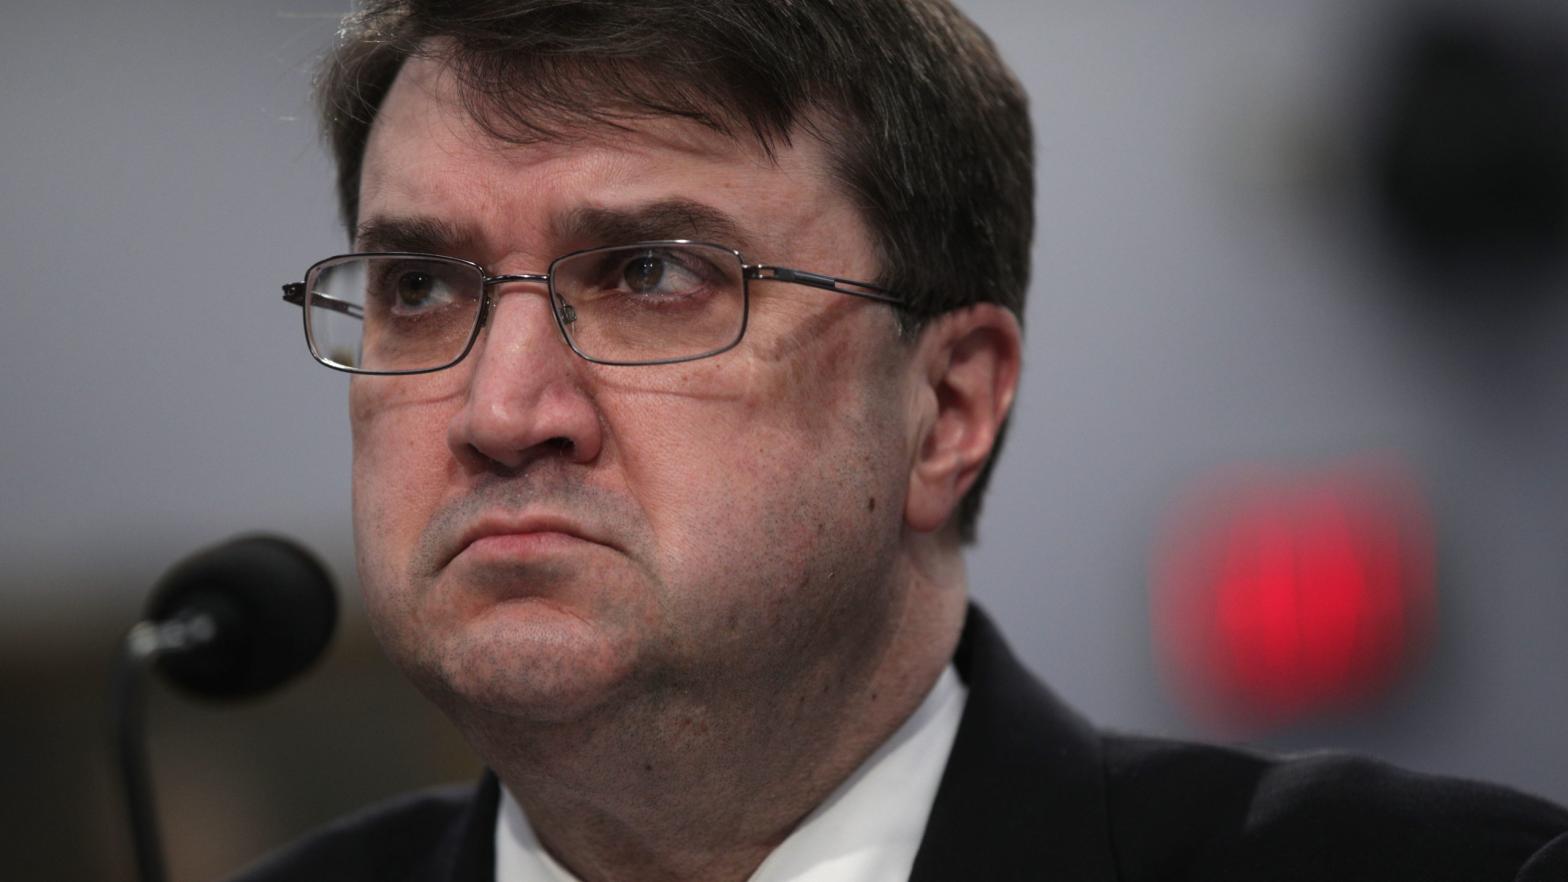 VA Secretary Robert Wilkie testifies during a hearing before a House Appropriations subcommittee on March 27, 2019 in Washington, DC.  (Photo: Alex Wong, Getty Images)